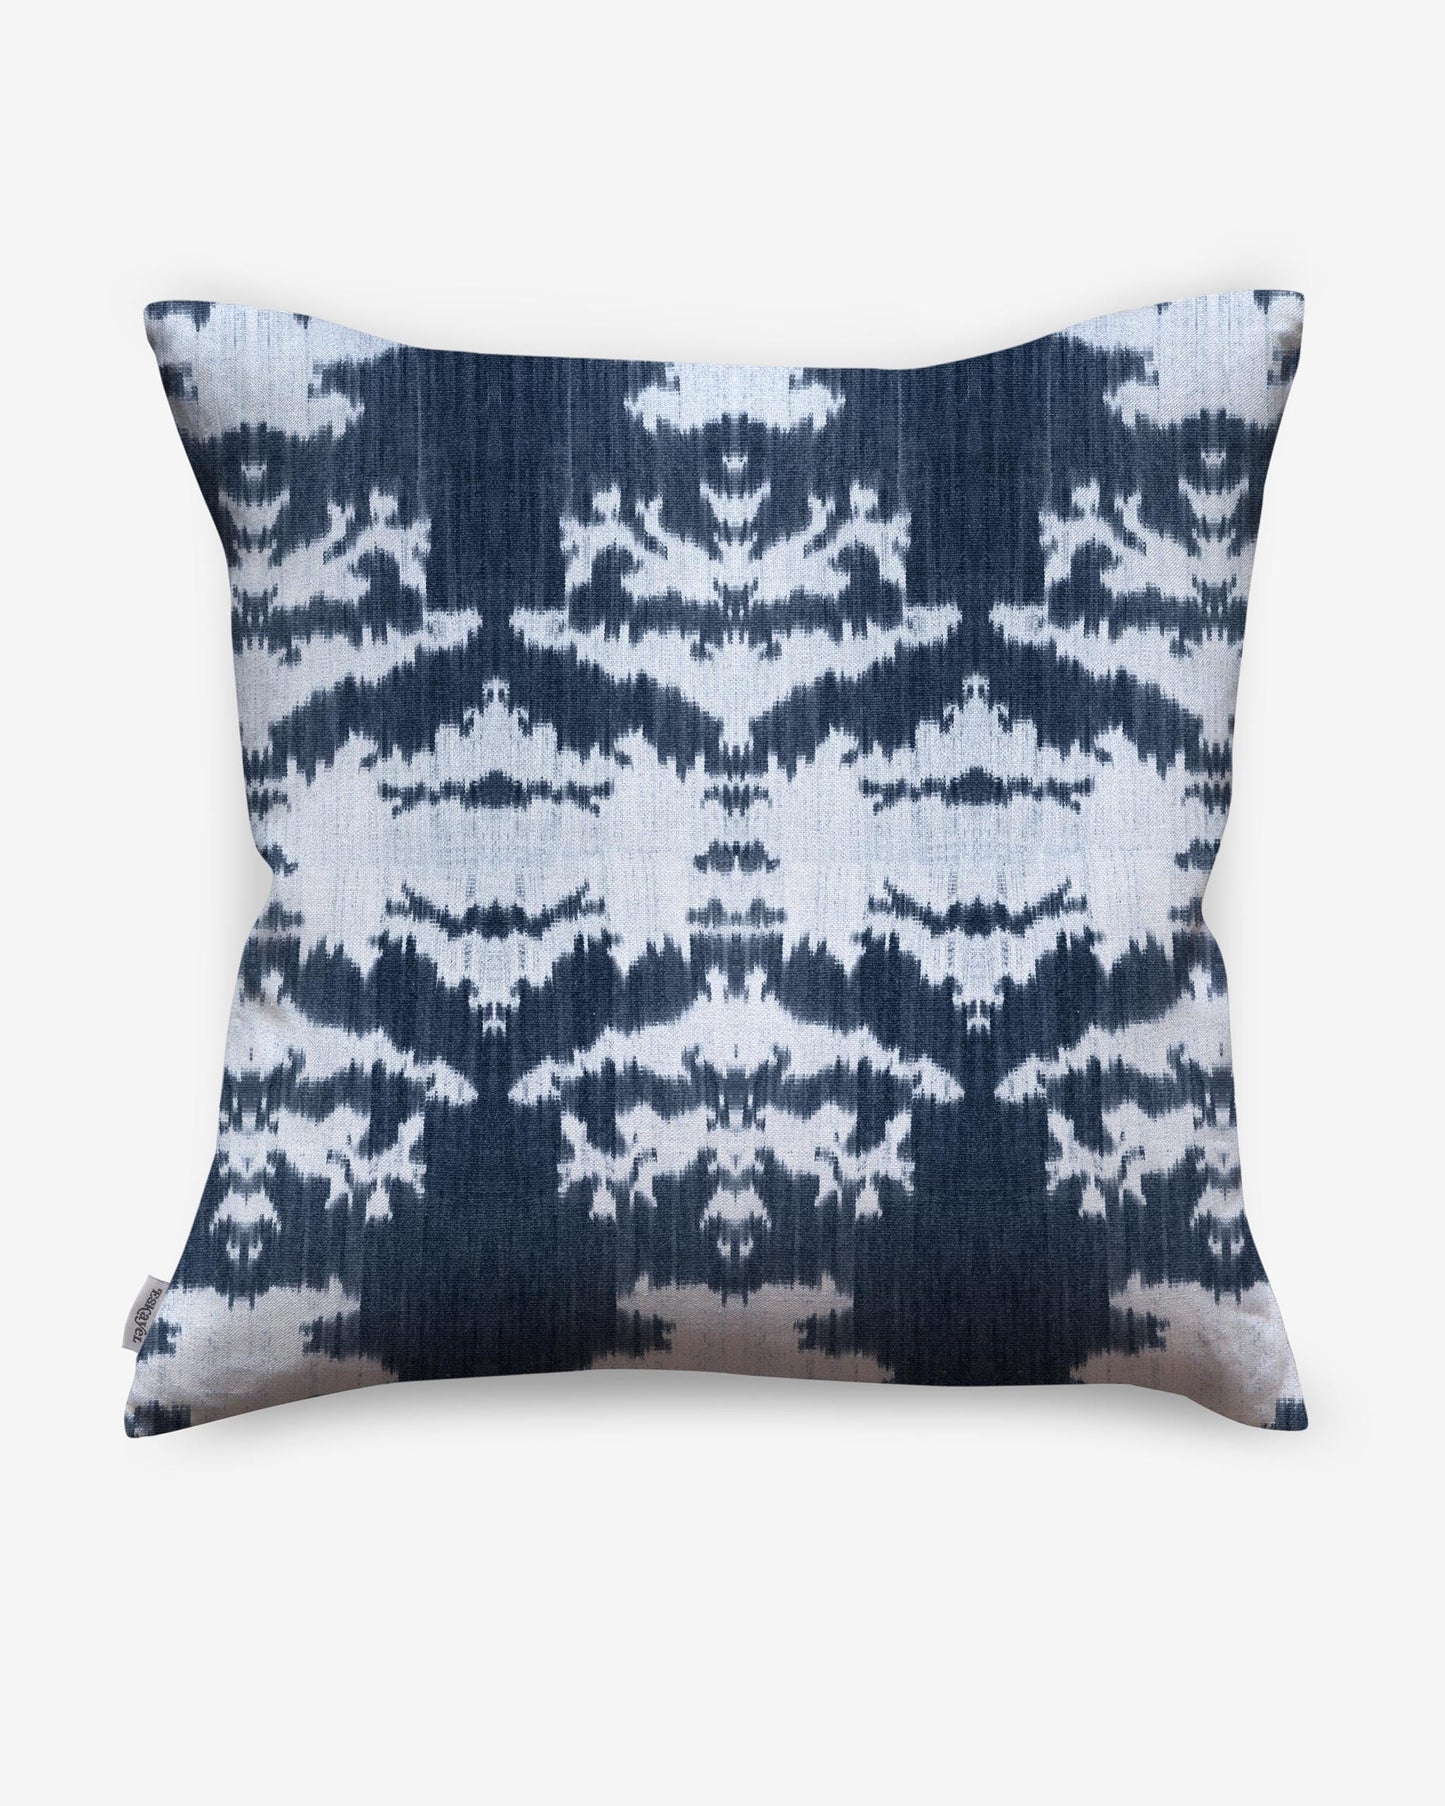 An indigo and white Dance Pillow Indigo Ikat from the Lora Collection with an abstract pattern